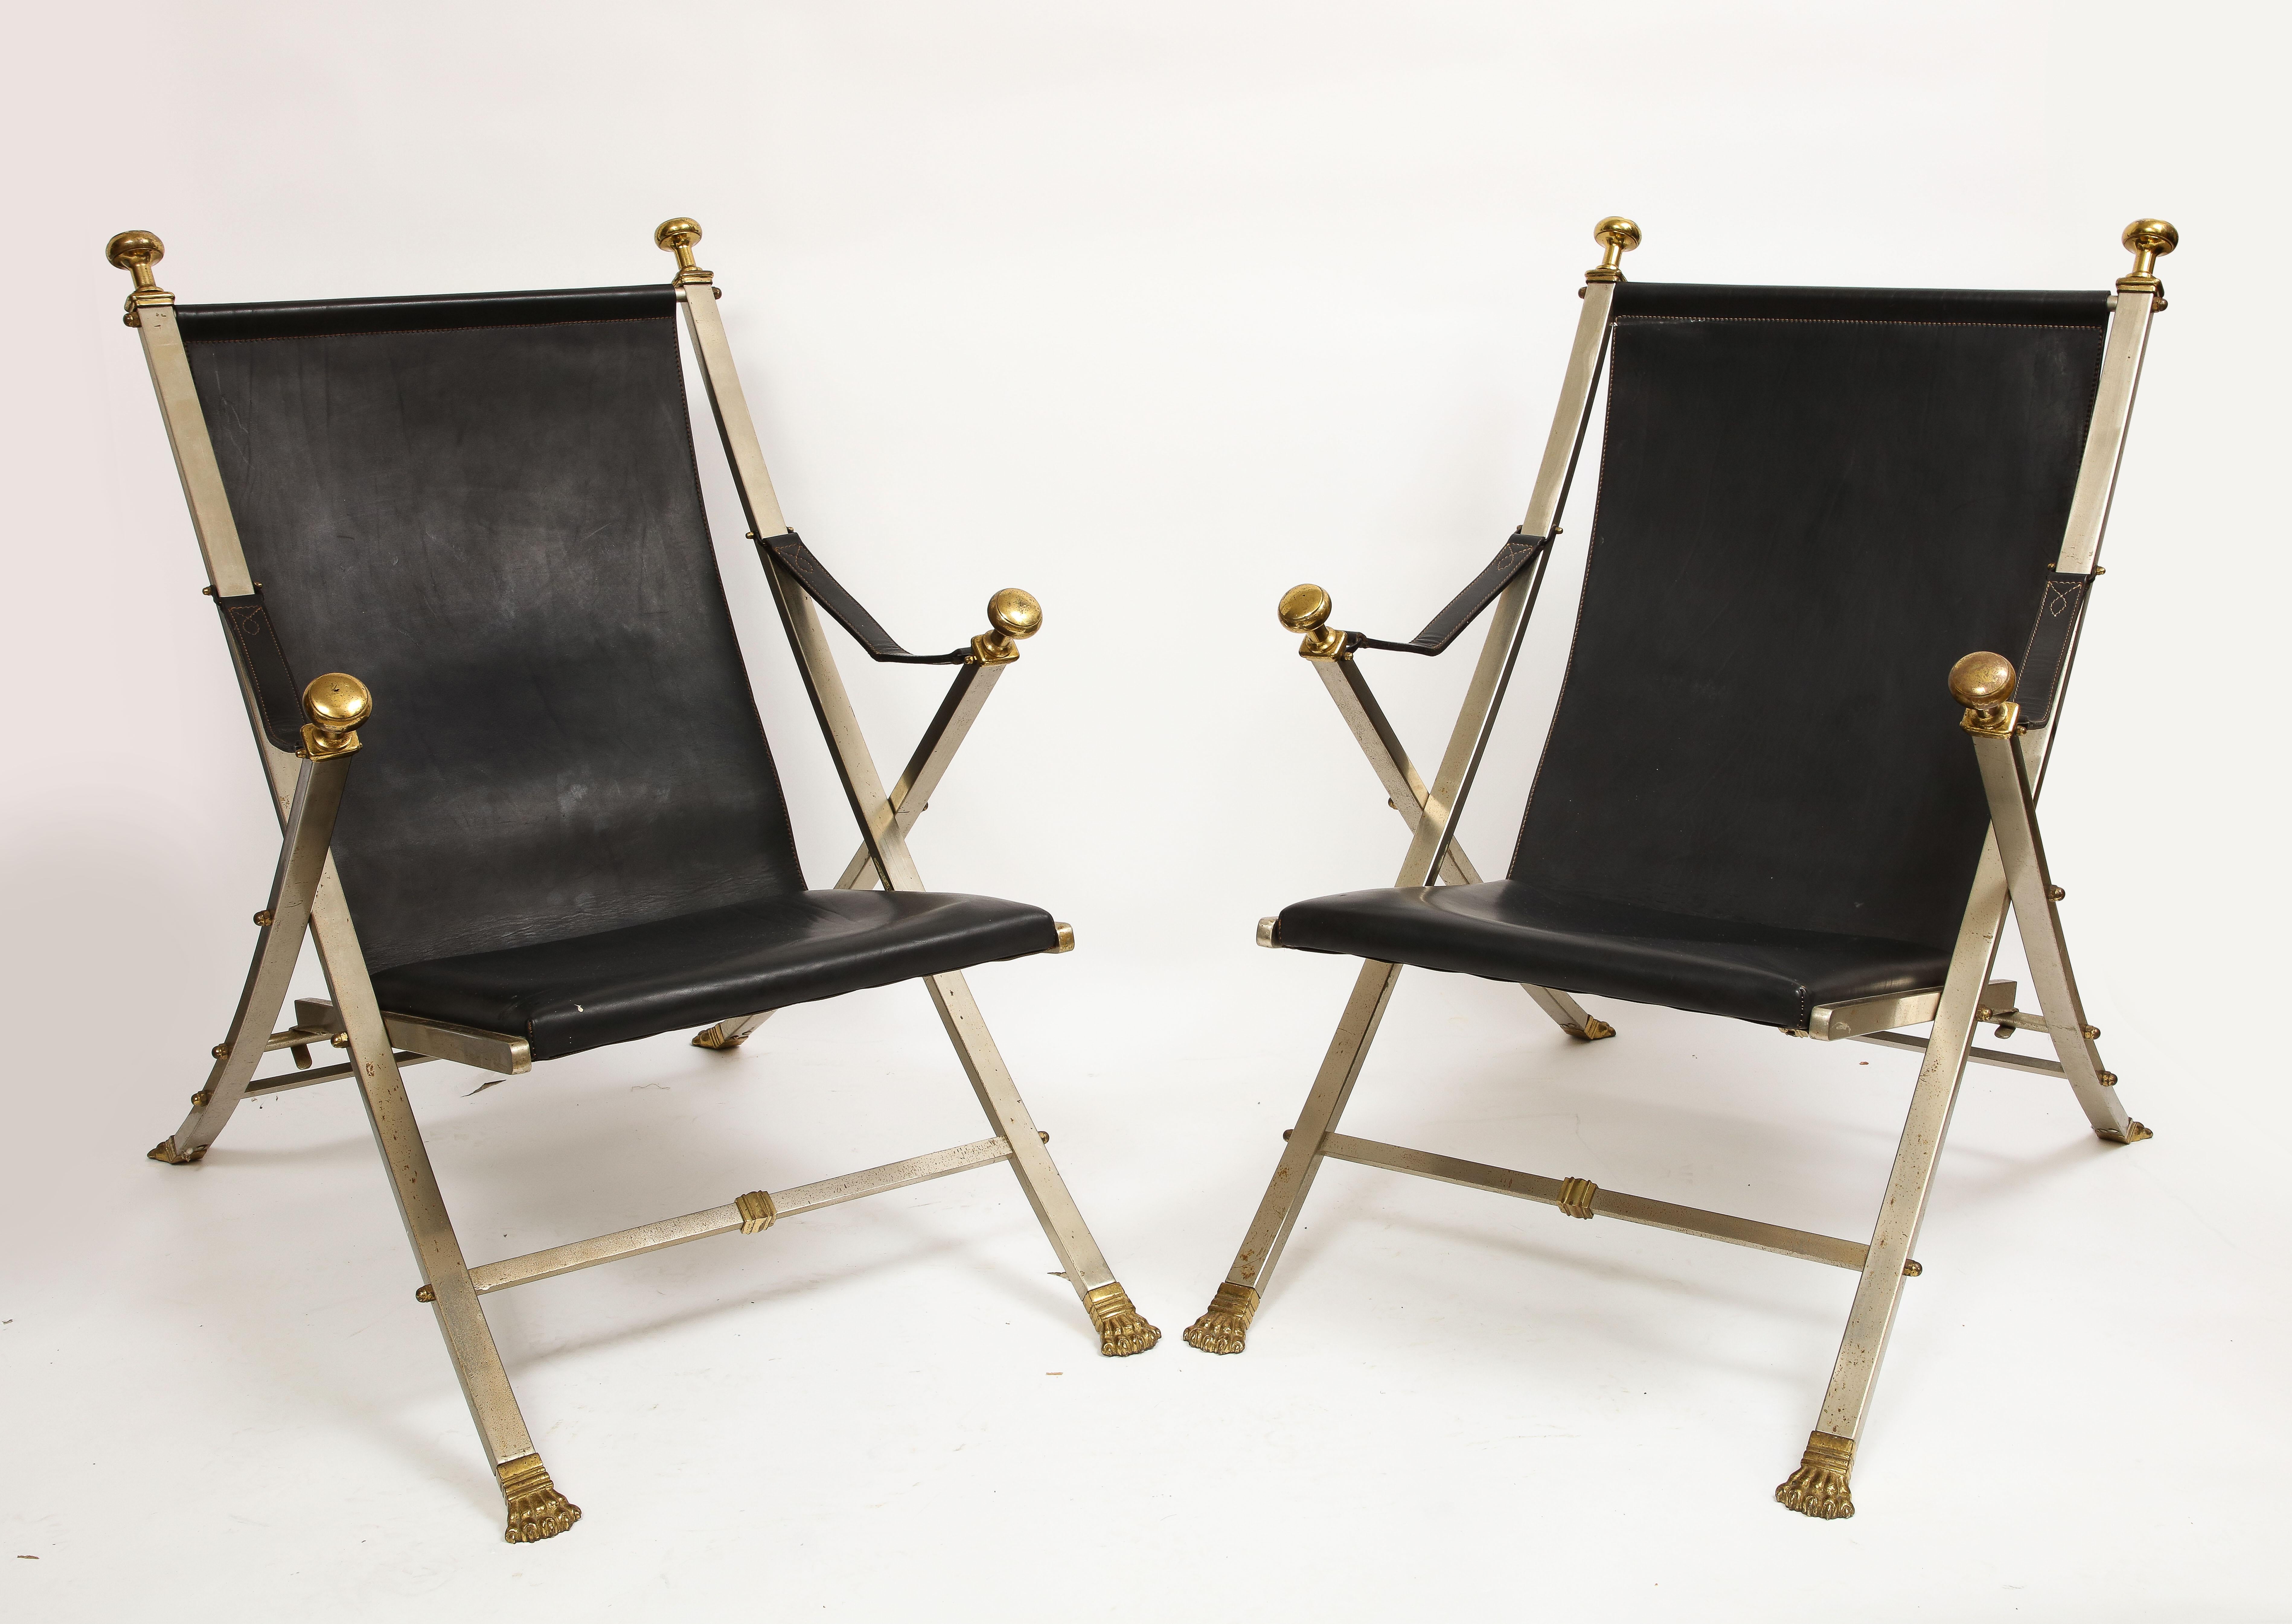 A Rare and Unusual Pair of French Mid-Century Maison Jansen Polished Steel and Leather Folding Chairs. Each is hand-made with intricate detail and fantastic craftsmanship. They are made with black leather seats and straps and each is set in polished